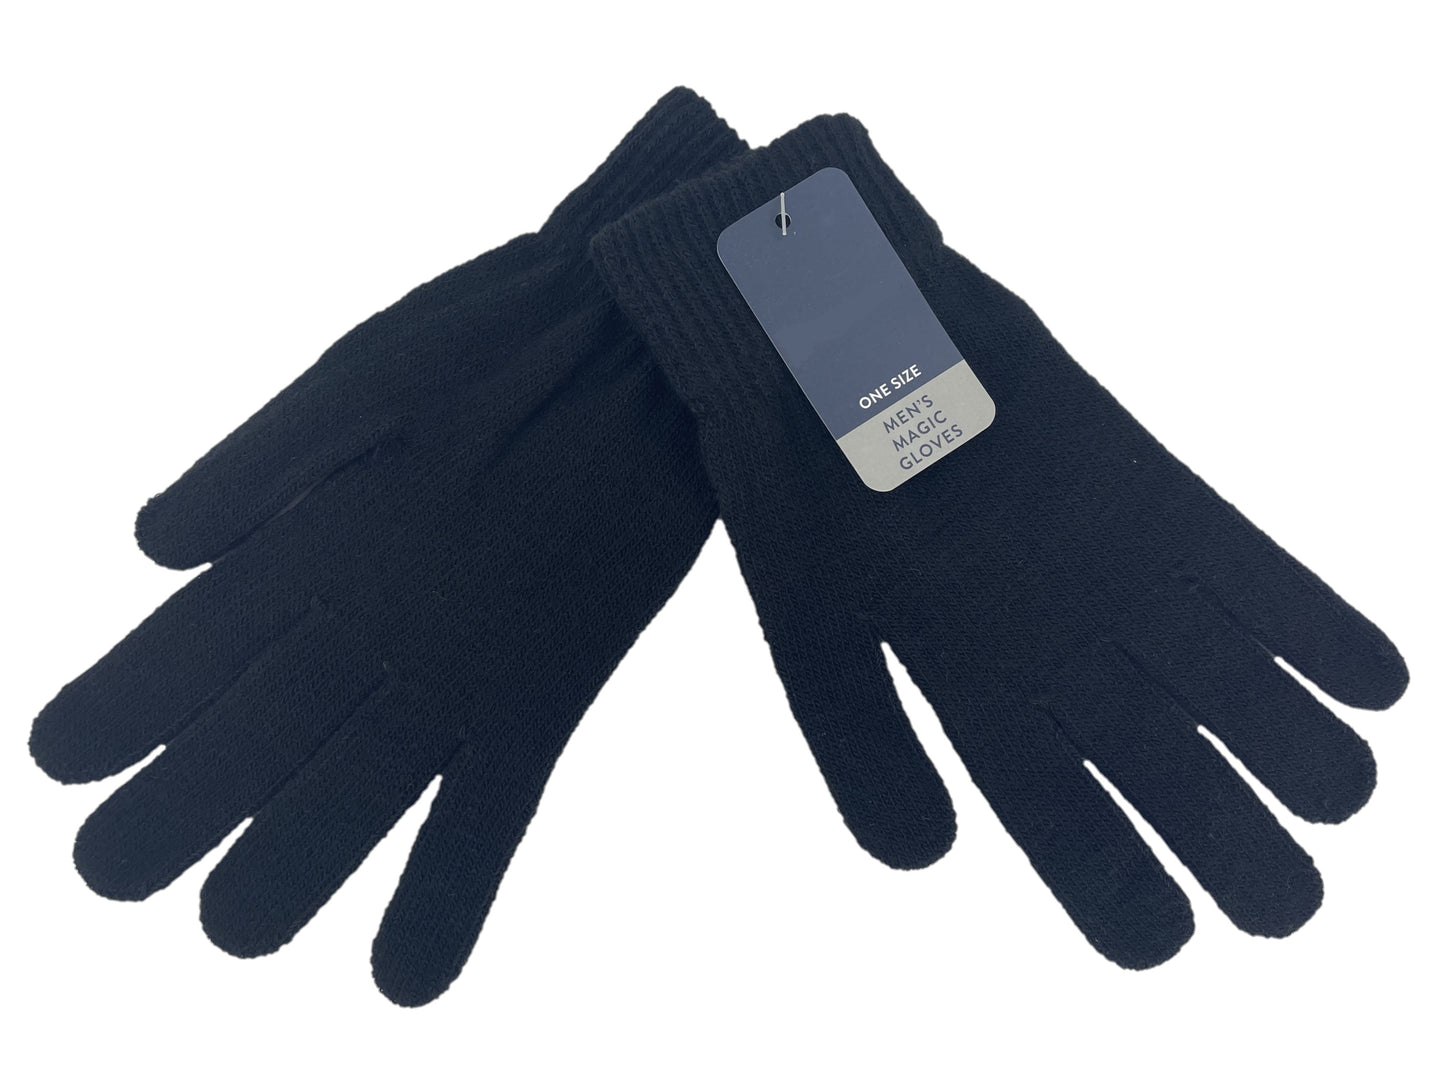 Mens Black Thermal Magic Stretch Knitted Gloves - 2, 4 or 6 Pair Packs